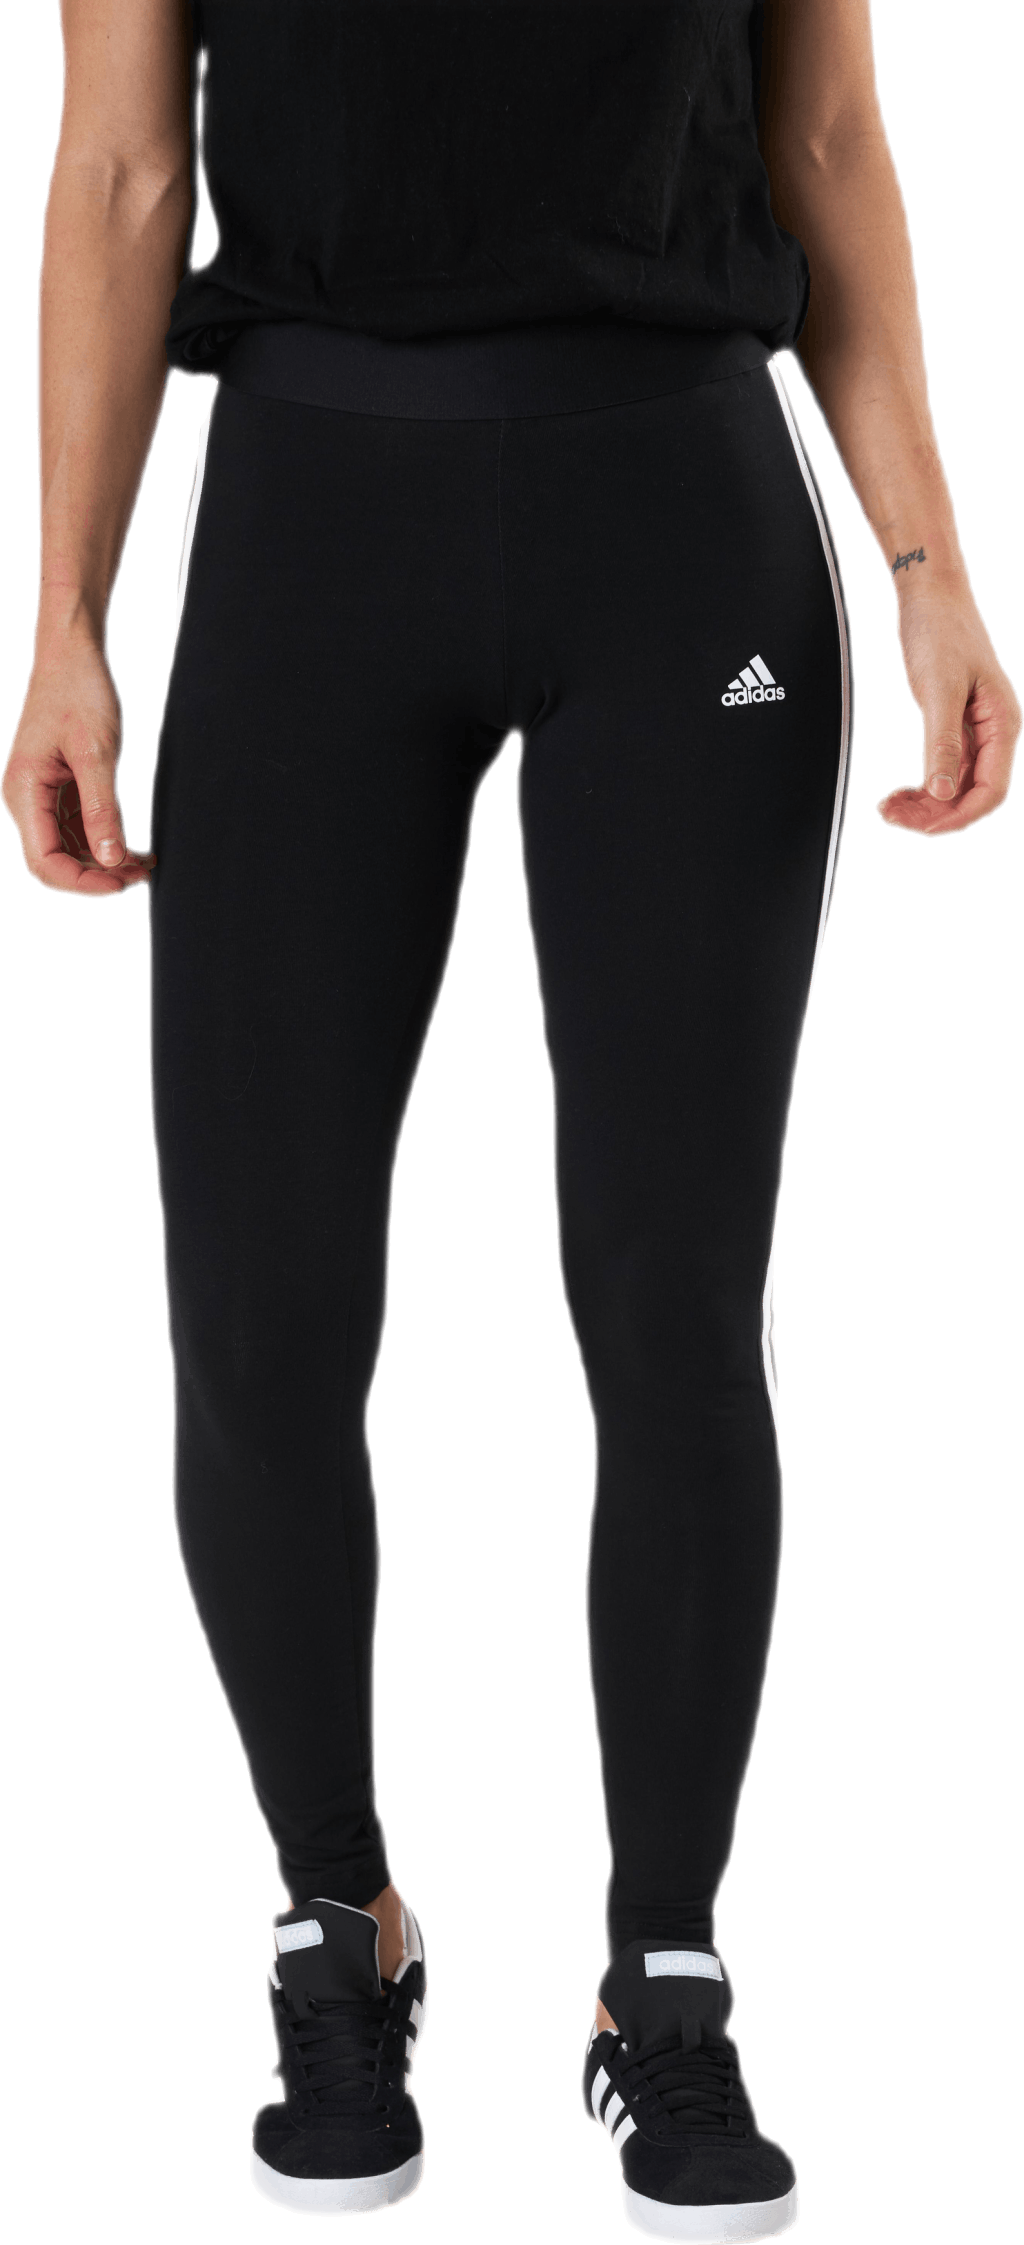 Visiter la boutique adidasadidas AGR XC Tights W Mailles Femme 